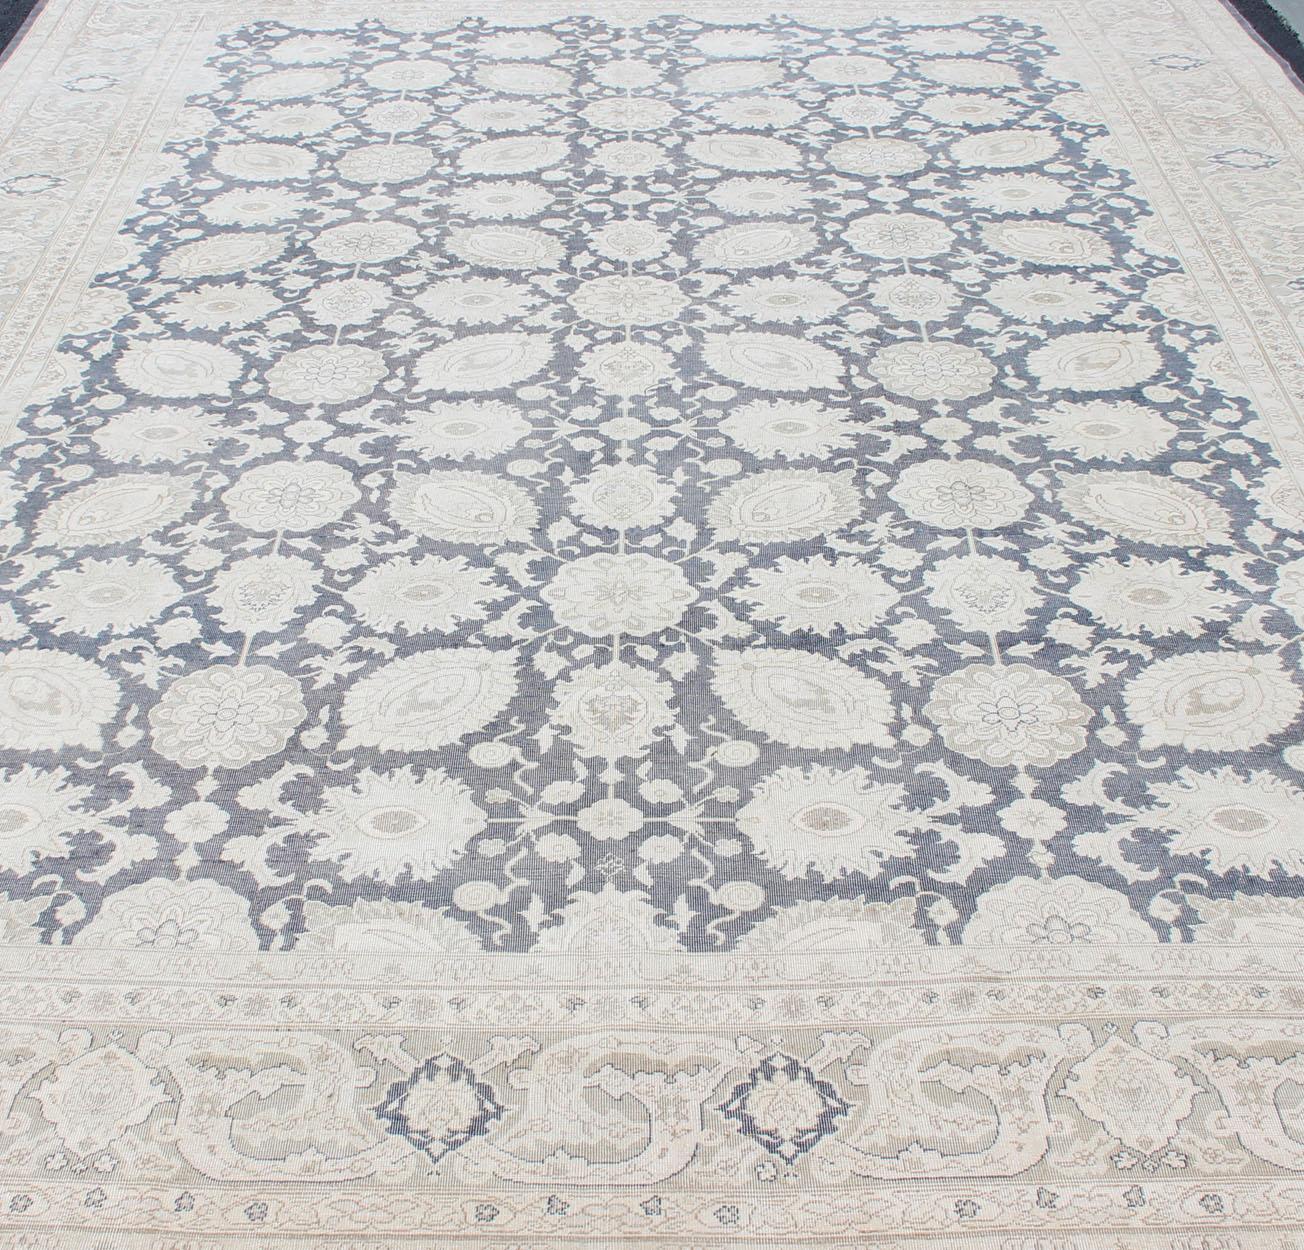 Large Vintage Tabriz Rug with All-Over Motif Design in Steel Gray and Tan In Good Condition For Sale In Atlanta, GA